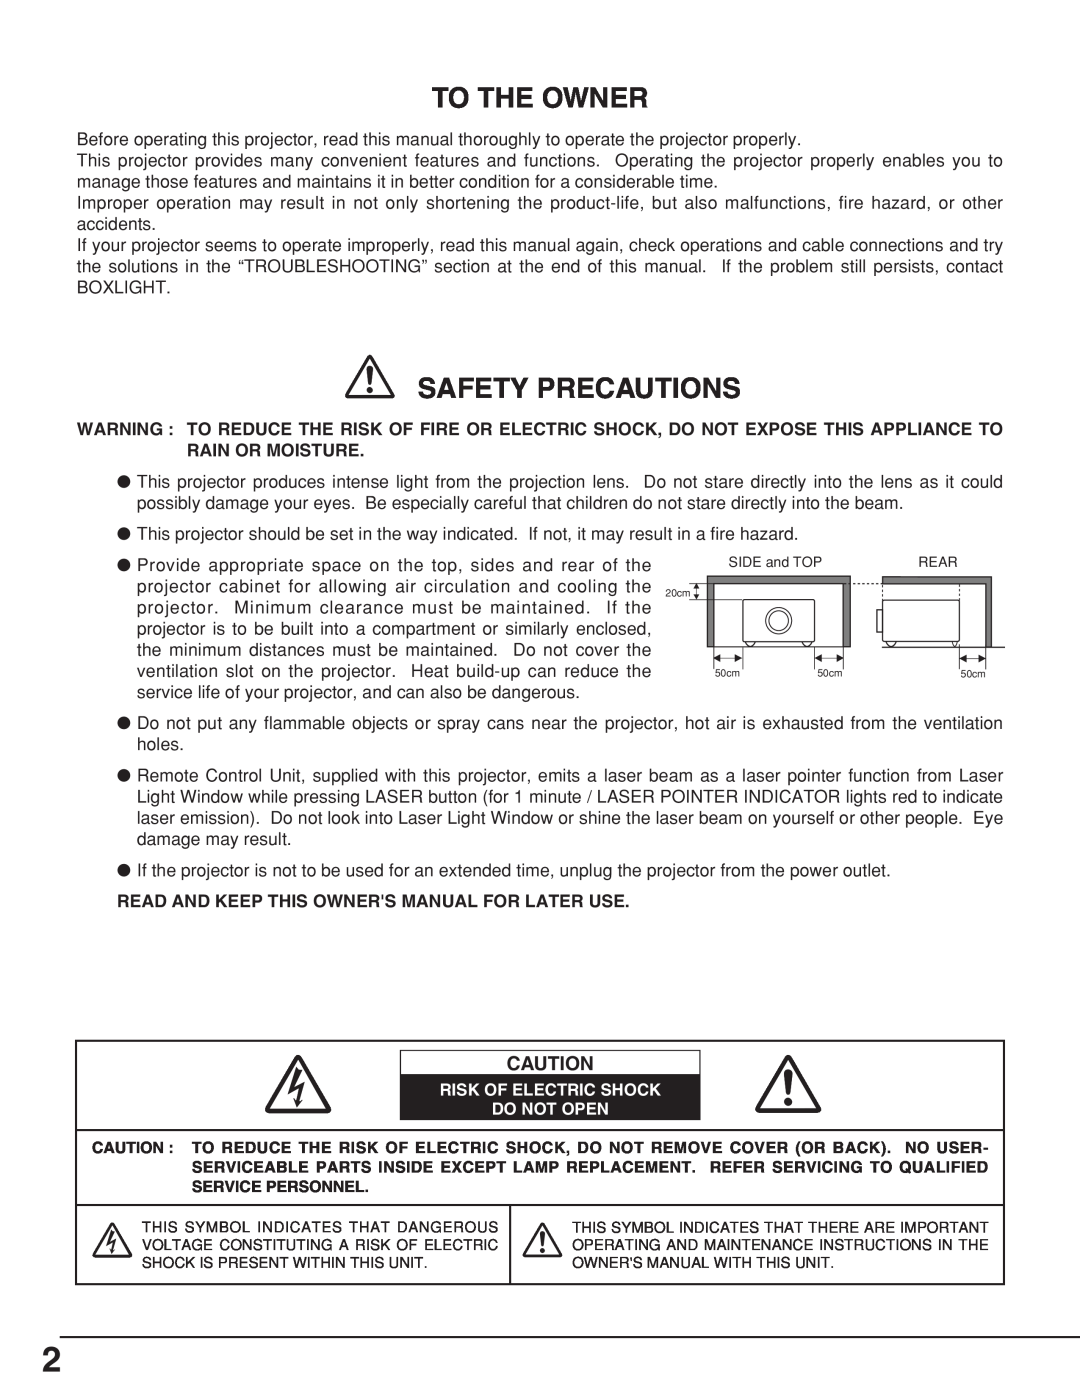 BOXLIGHT CP-18t manual To The Owner, Safety Precautions, Read And Keep This Owners Manual For Later Use 